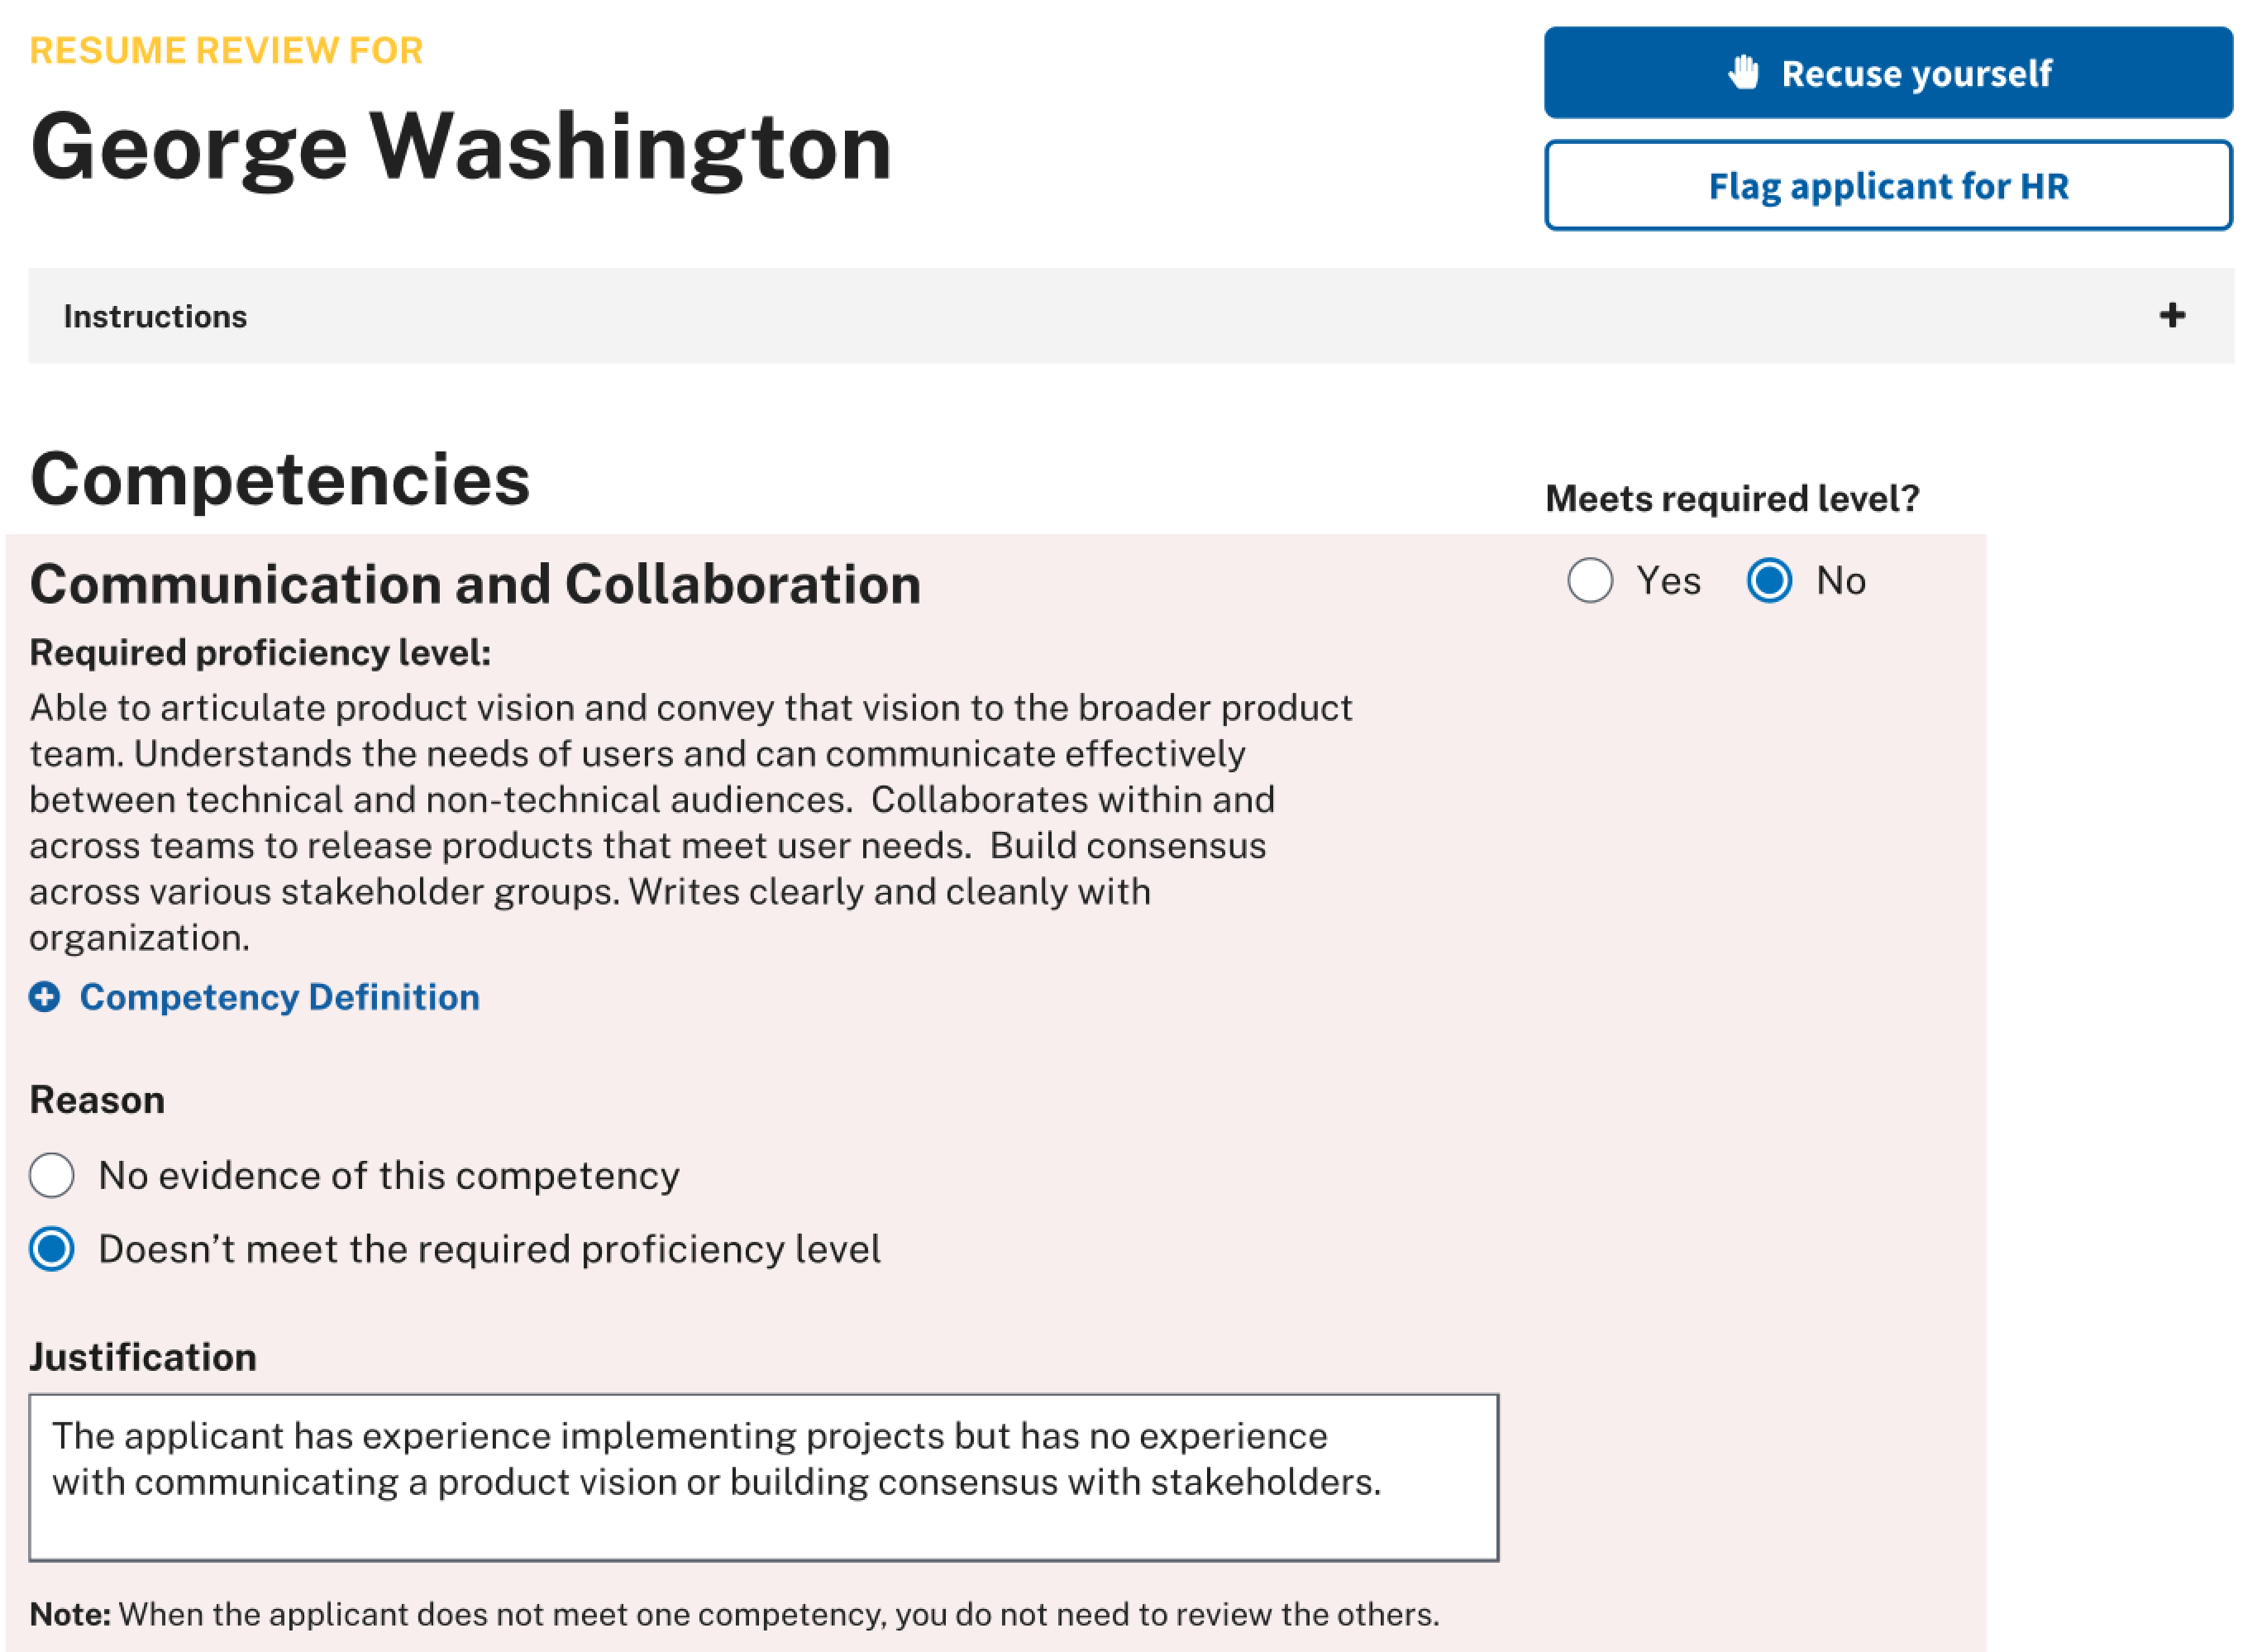 Screenshot of the SME view of the Resume Review Tool